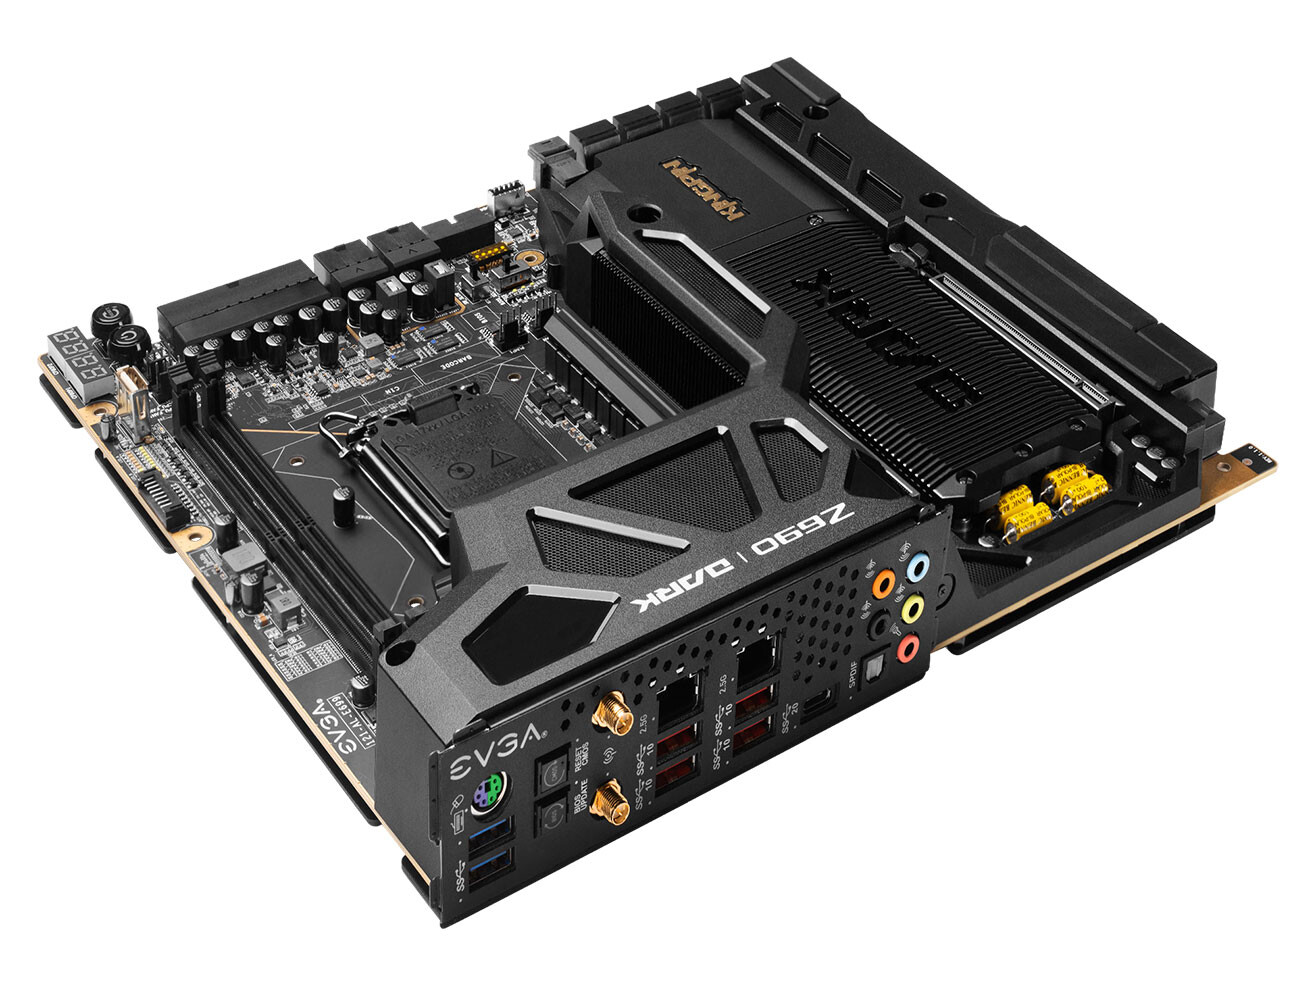 You are currently viewing The Z690 DARK KINGPIN motherboard from EVGA has been unveiled.